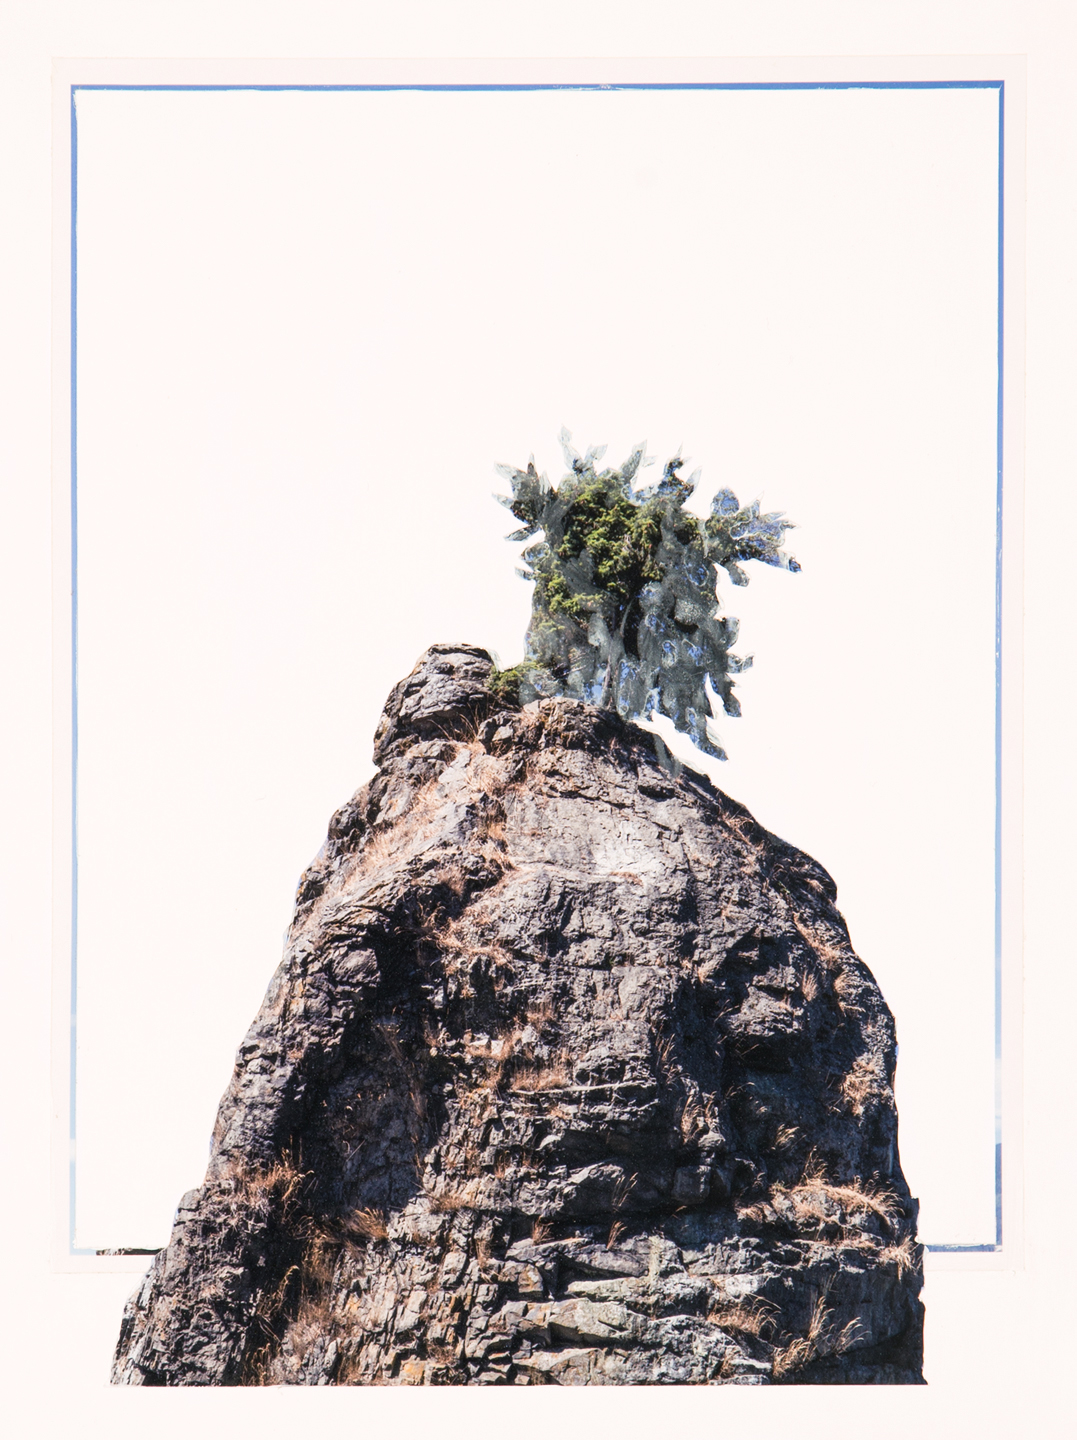  Pineapple Rock, 2017  12 x 9 inches  Acrylic and C-print on paper          